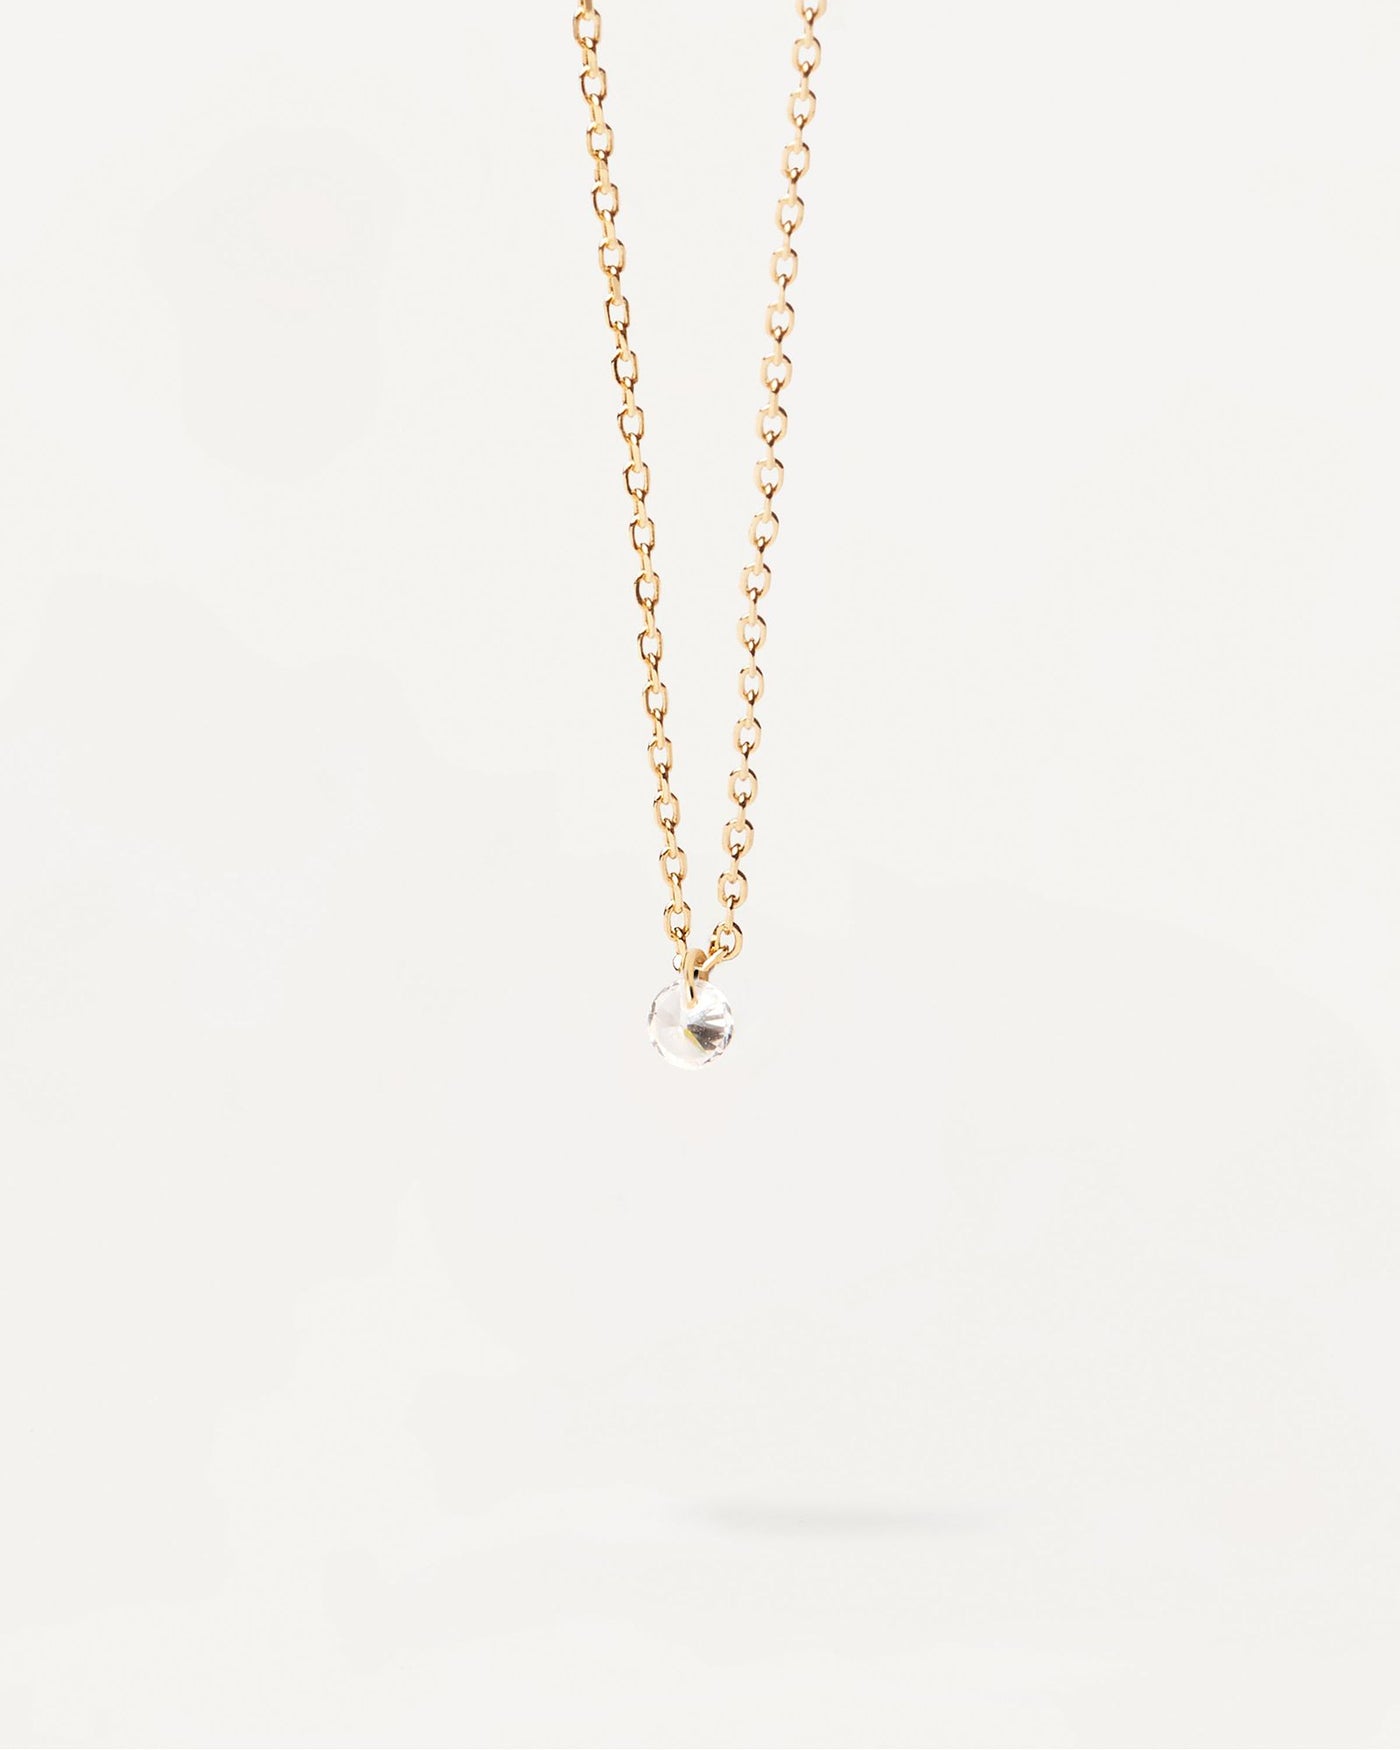 2024 Selection | Joy solitary Necklace. Gold-plated silver minimal necklace with round zirconia pendant. Get the latest arrival from PDPAOLA. Place your order safely and get this Best Seller. Free Shipping.